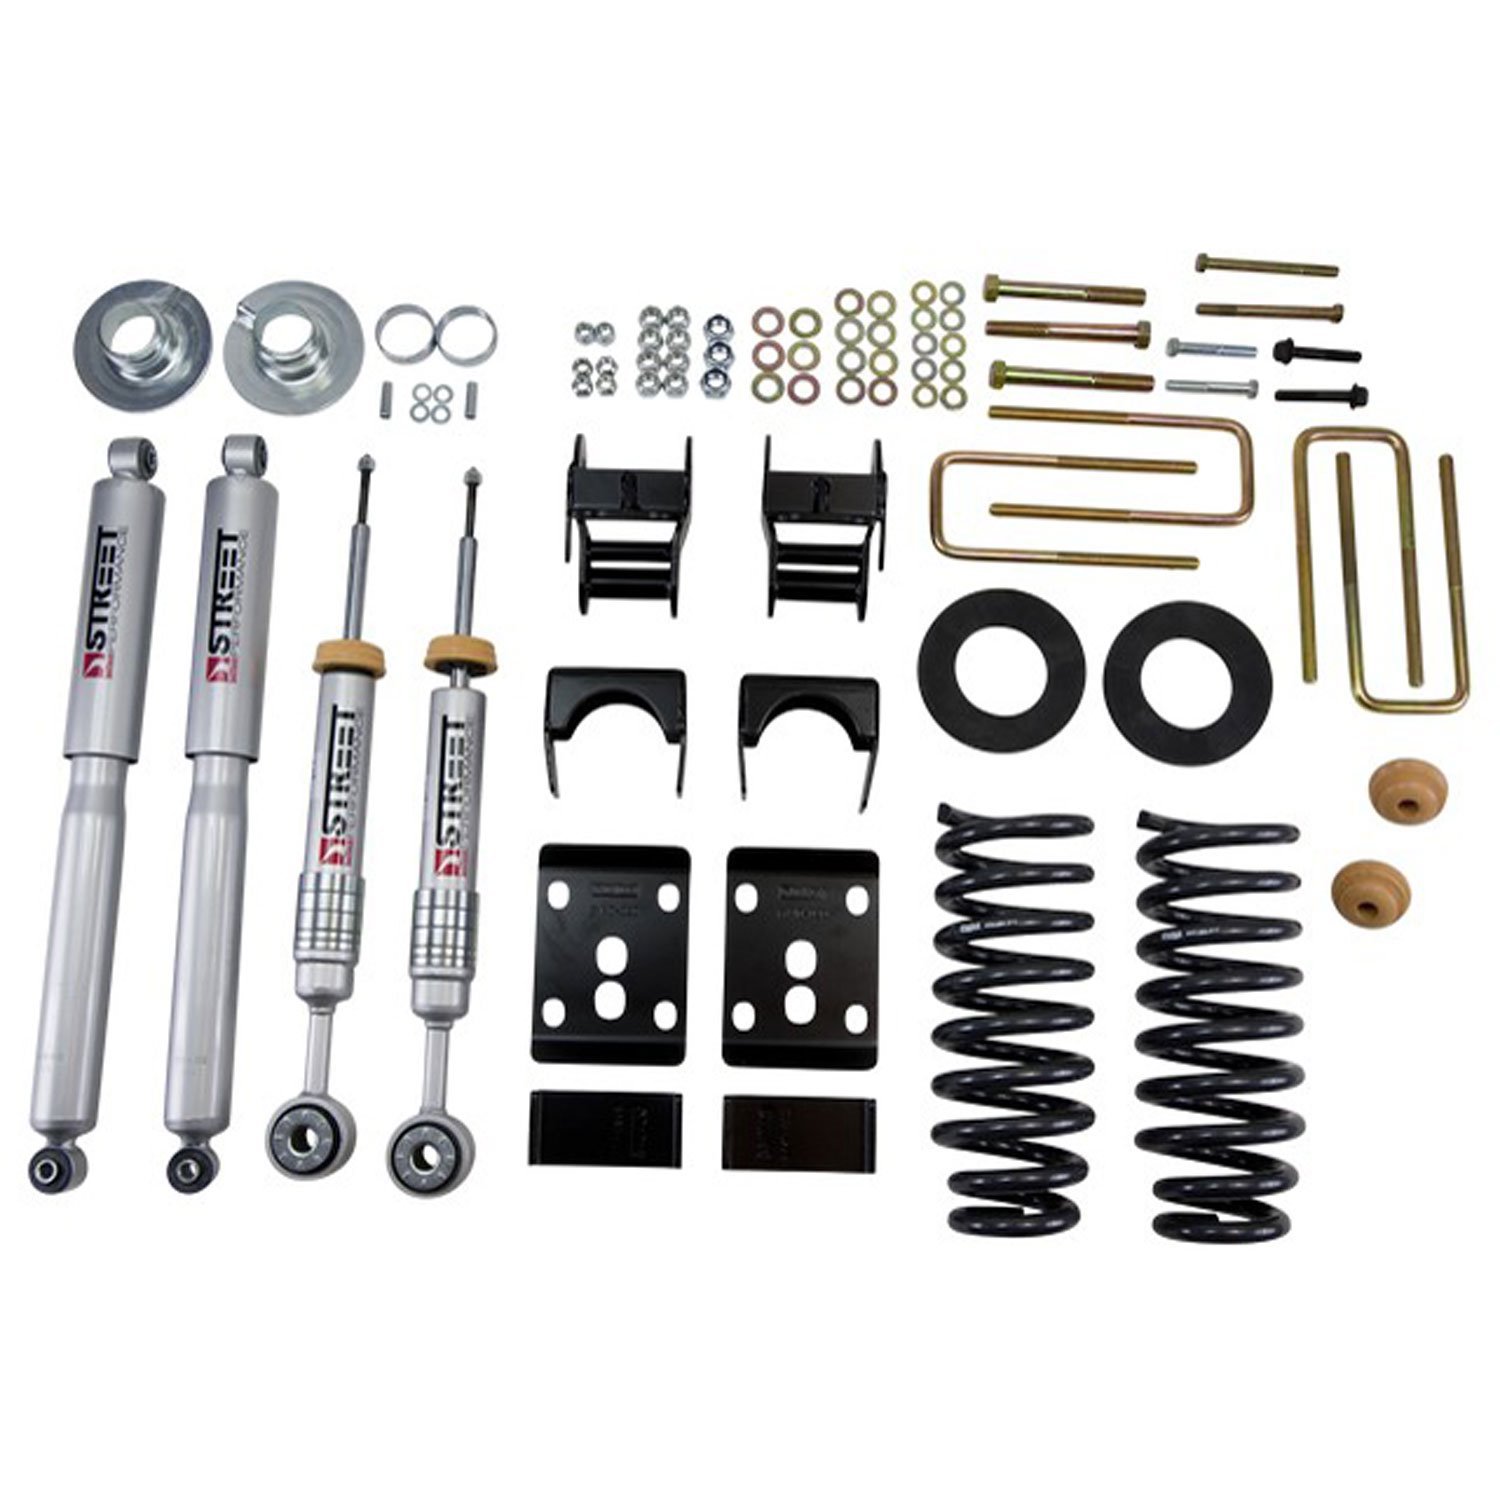 Complete Lowering Kit for 2009-2013 Ford F-150